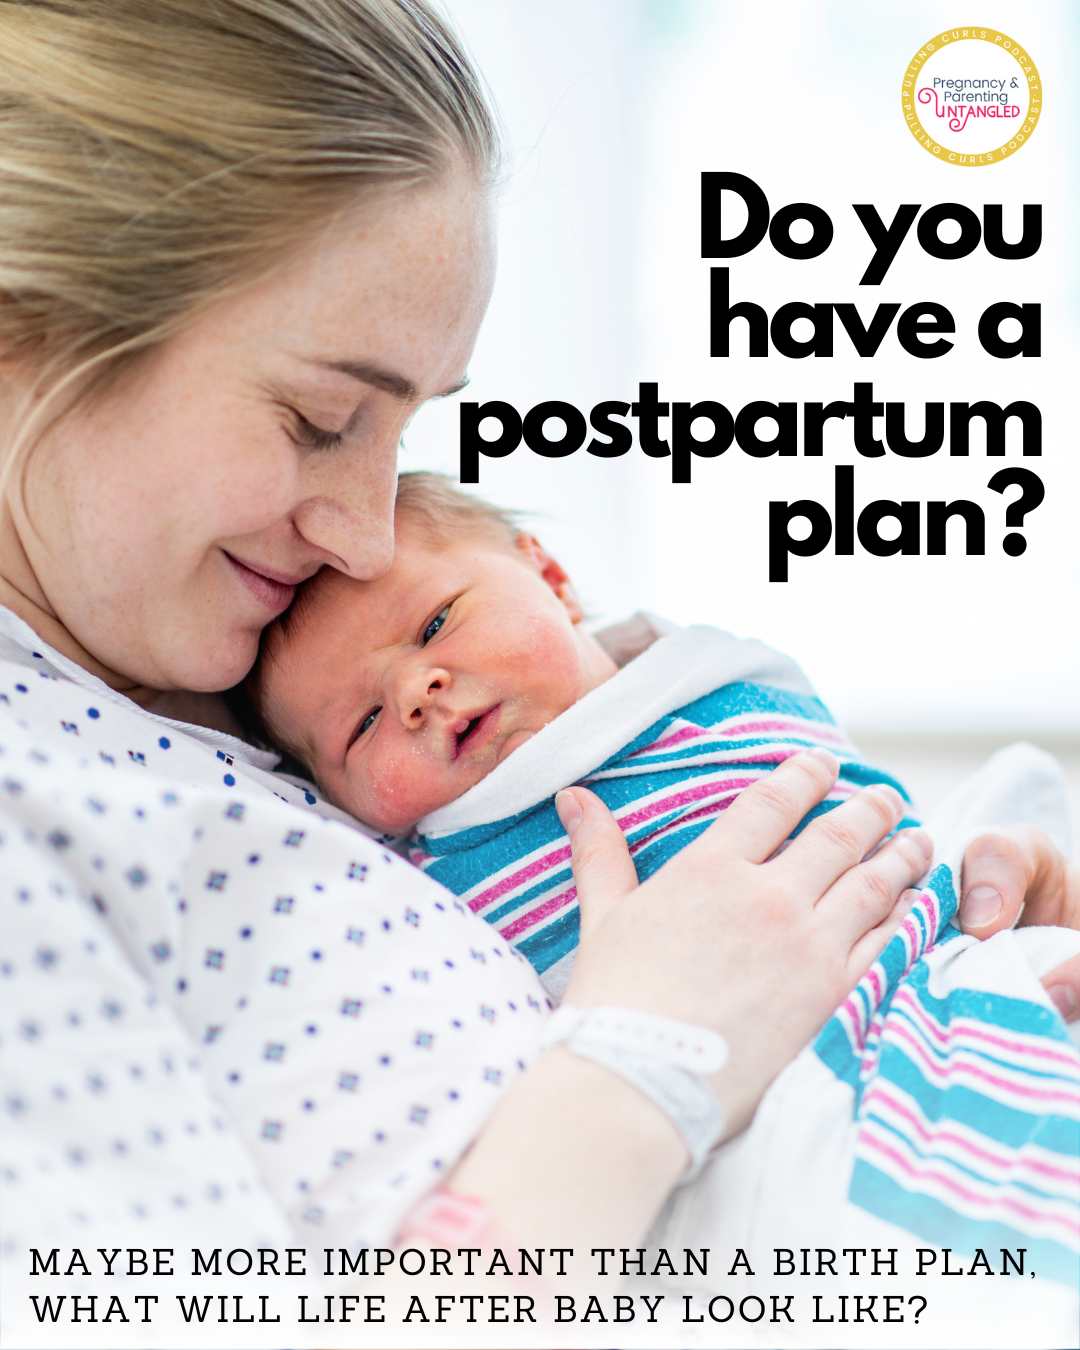 "Create Your Postpartum Plan: From sleep schedules to helpful resources, learn how to prepare for life after the baby's arrival. Get tips on identifying trouble signs, enlisting support, and getting the much-needed rest you deserve. Don't miss out on essential advice for a successful postpartum experience. #postpartumrecovery #newmom #parentingtips" via @pullingcurls